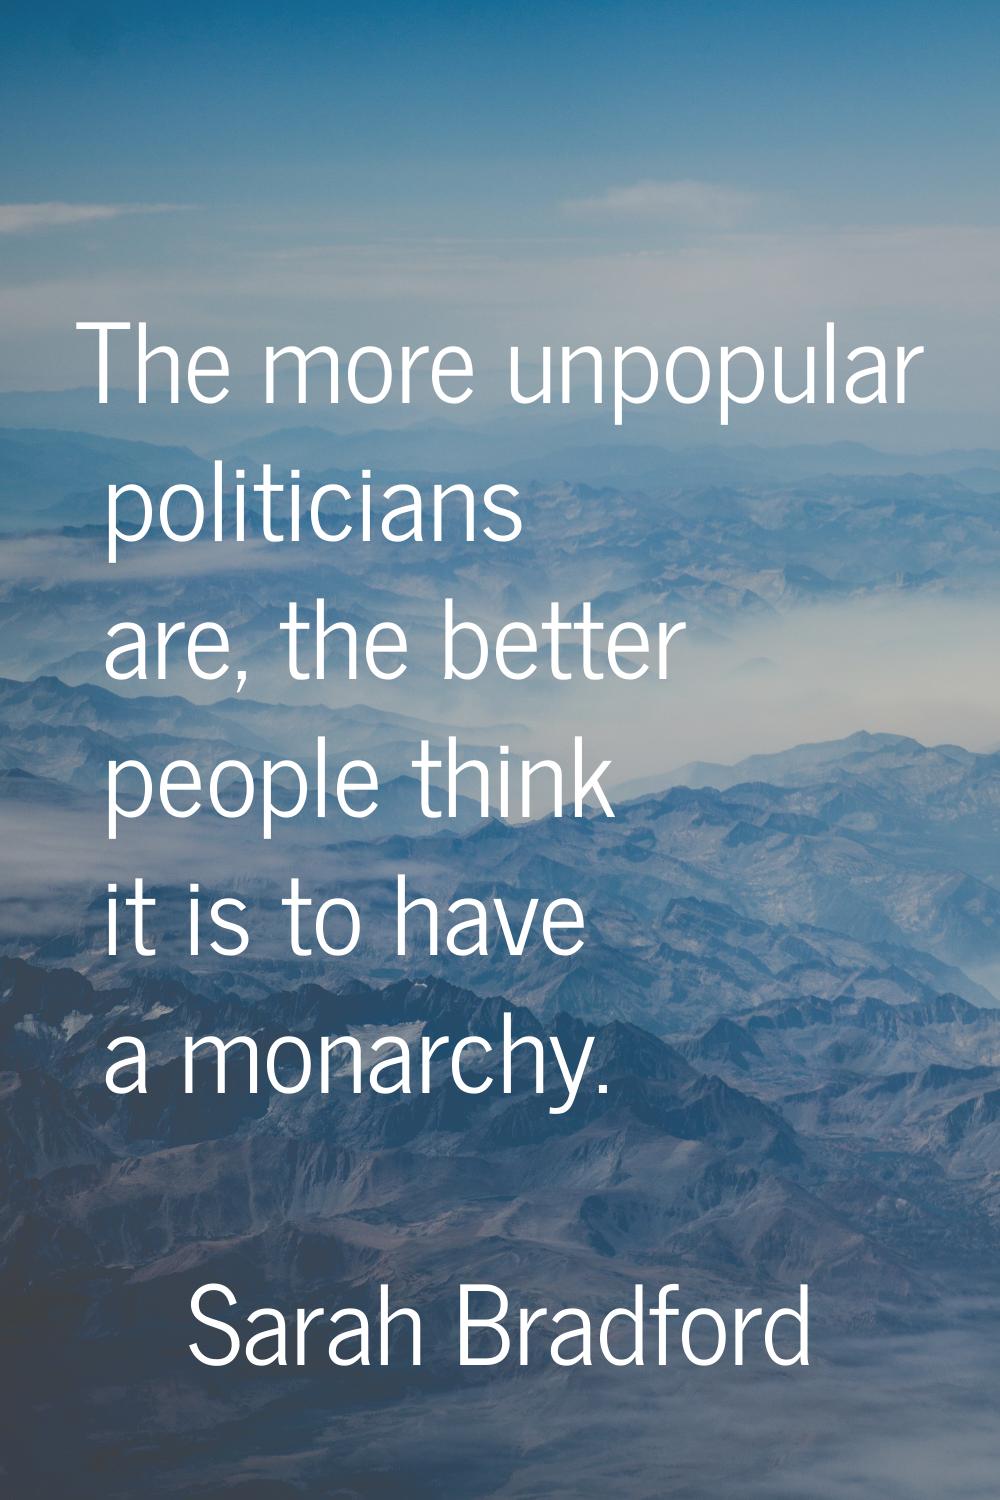 The more unpopular politicians are, the better people think it is to have a monarchy.